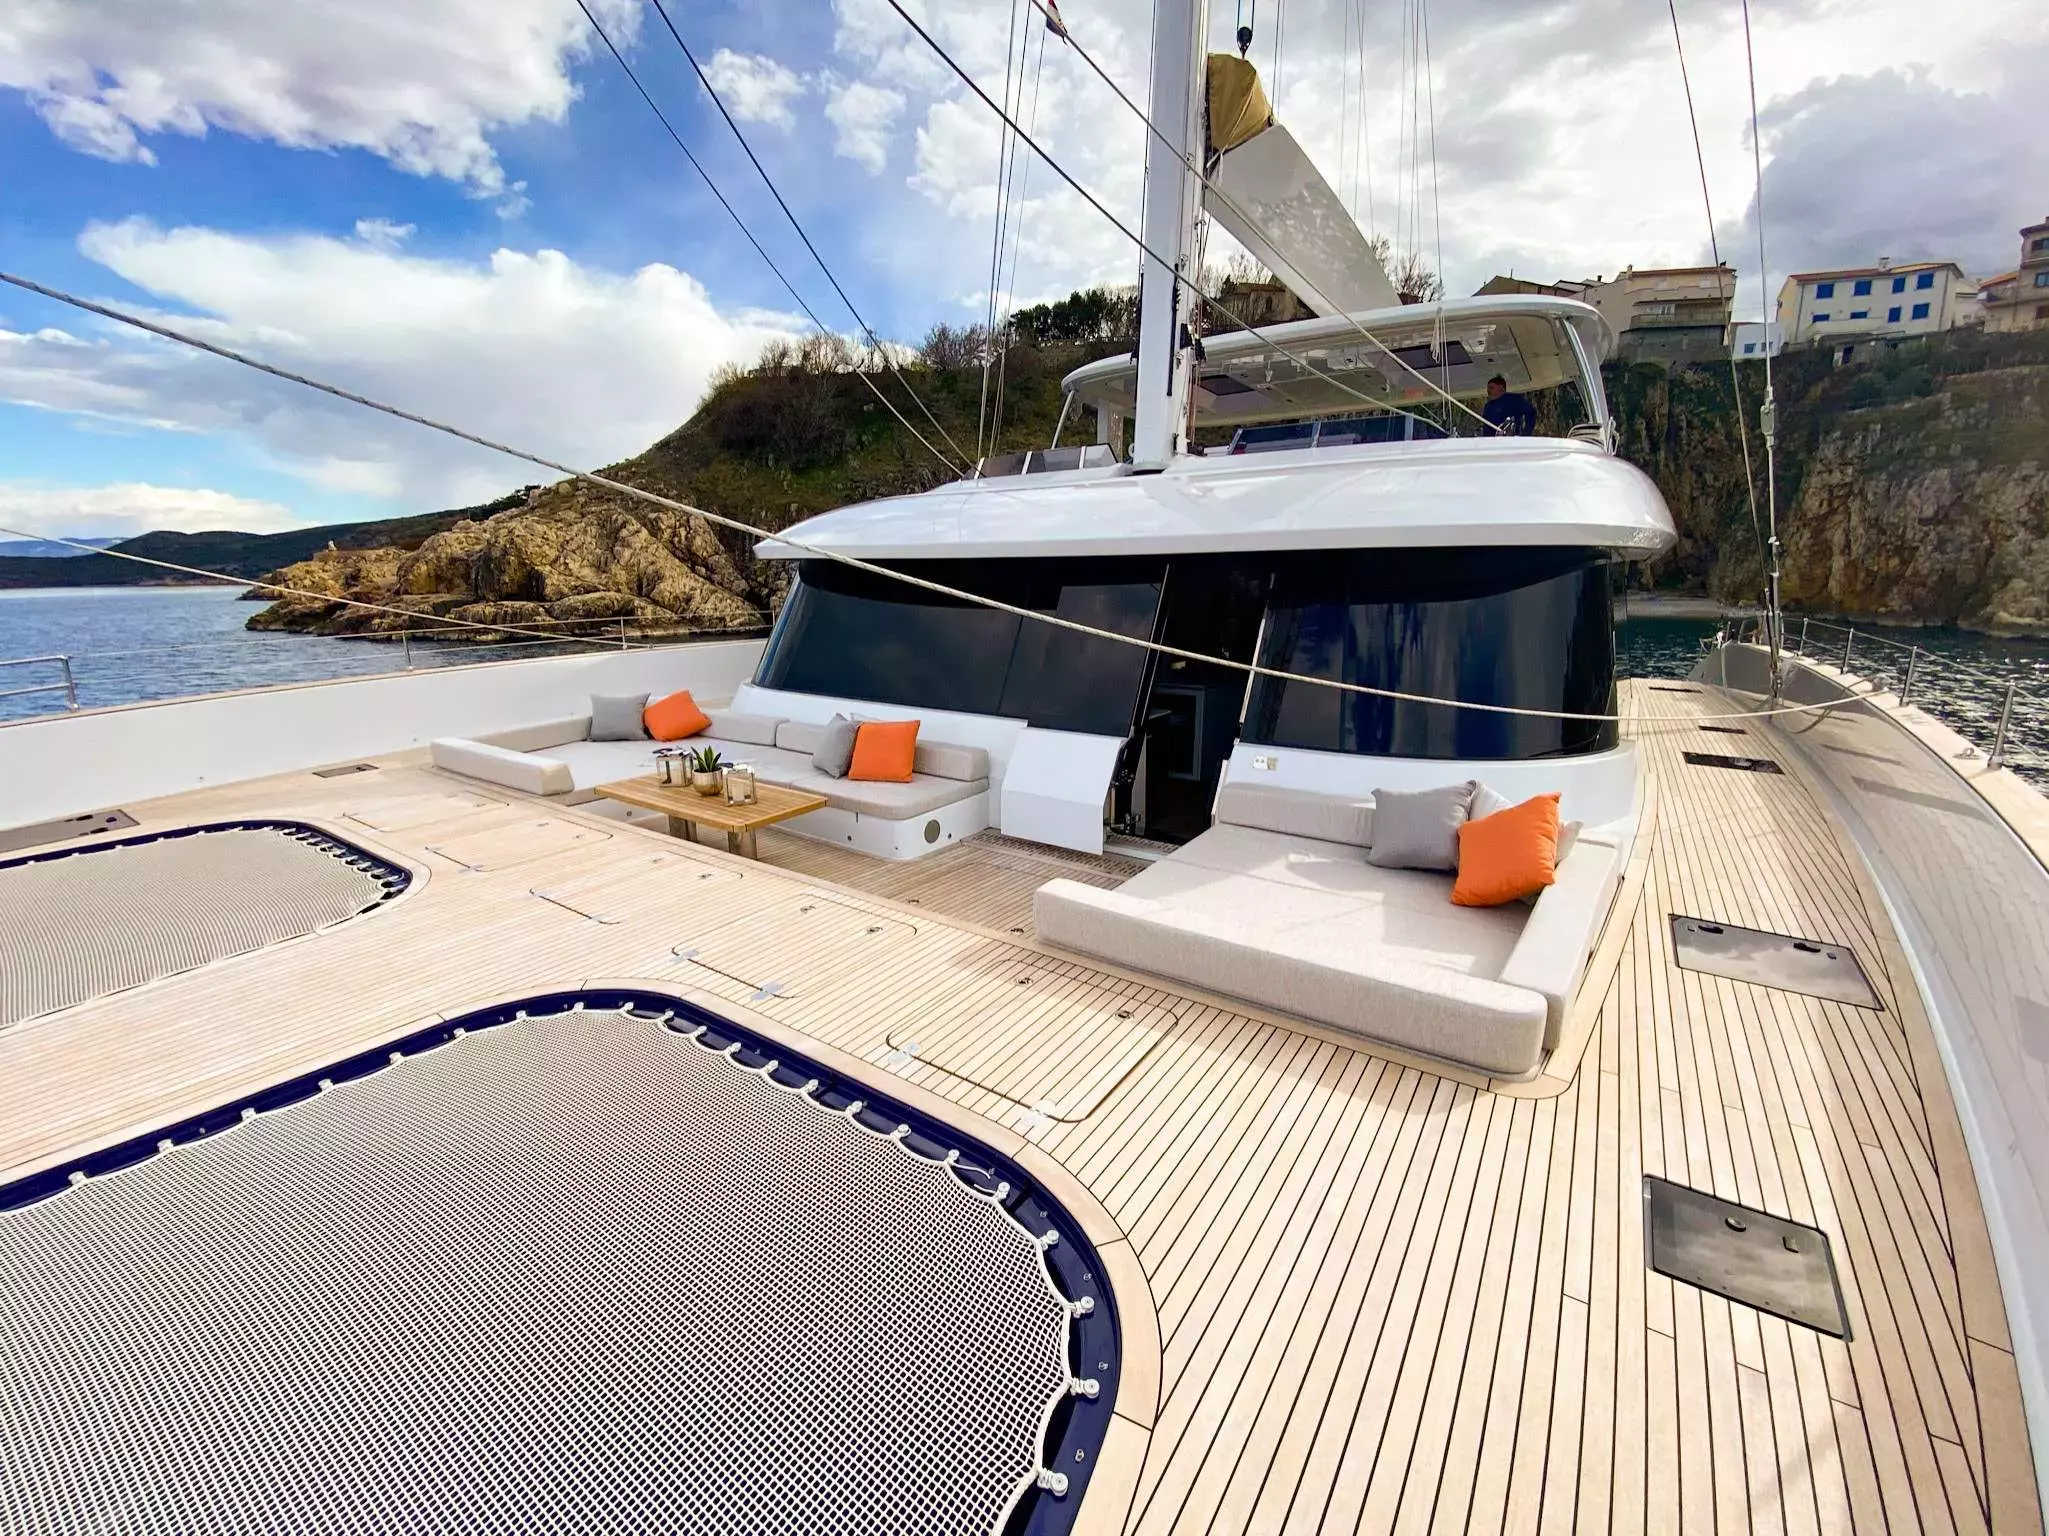 Fantastic Too by Sunreef Yachts - Top rates for a Charter of a private Luxury Catamaran in St Barths